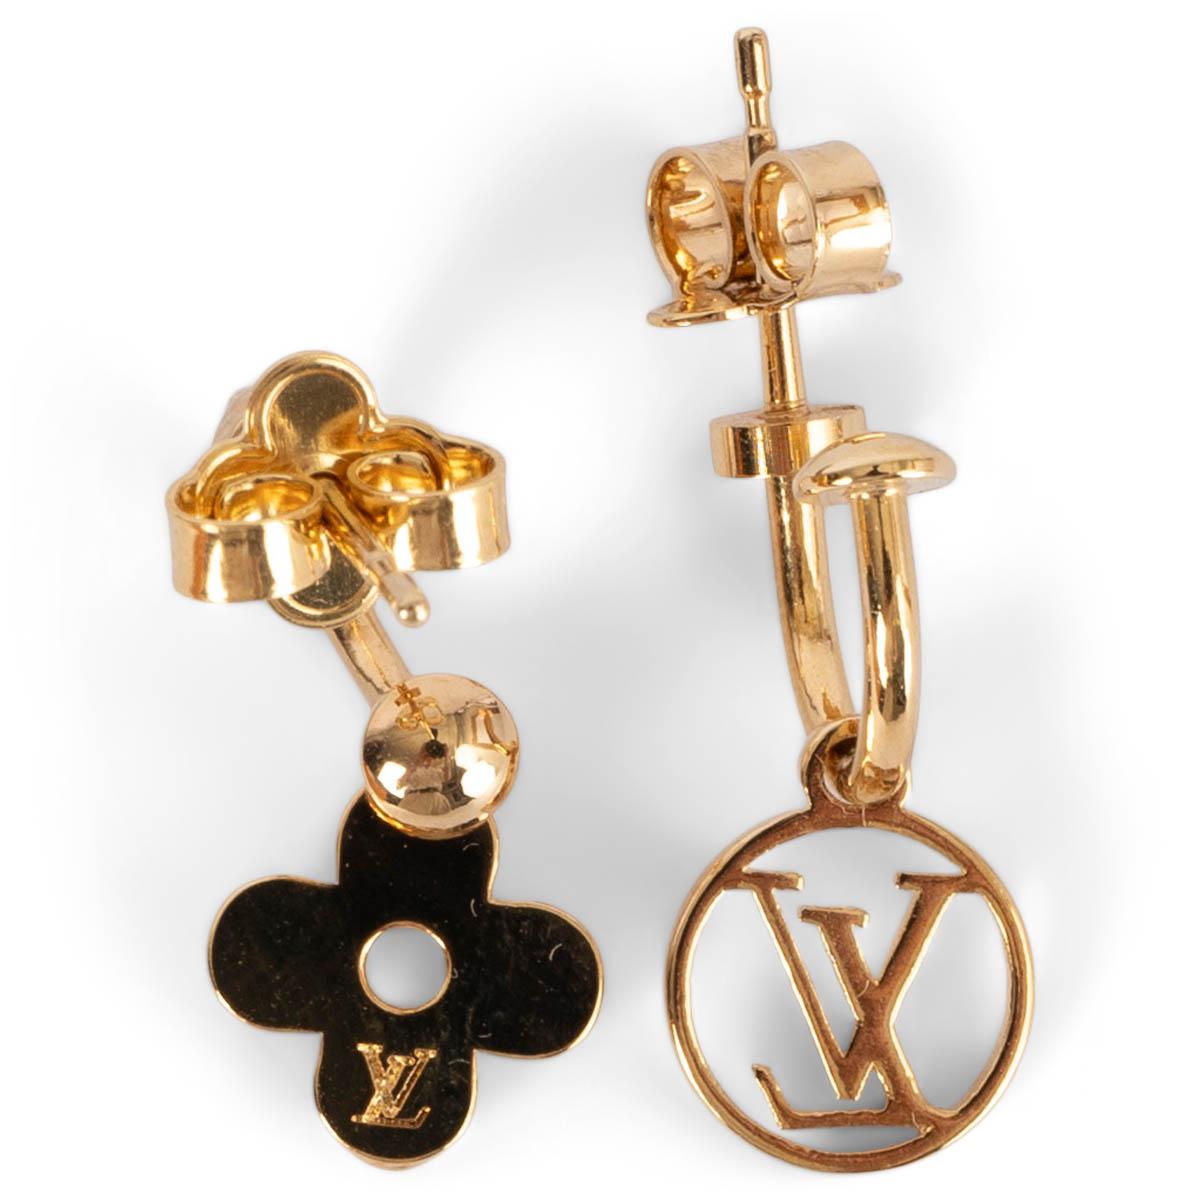 100% authentic Louis Vuitton Blooming earrings in gold plated metal. Blooming reinterprets the House's iconic LV Circle and Monogram Flower signatures as dangling charms. Brand new. Come with dust bag and box. 

Measurements
Length	2.5cm